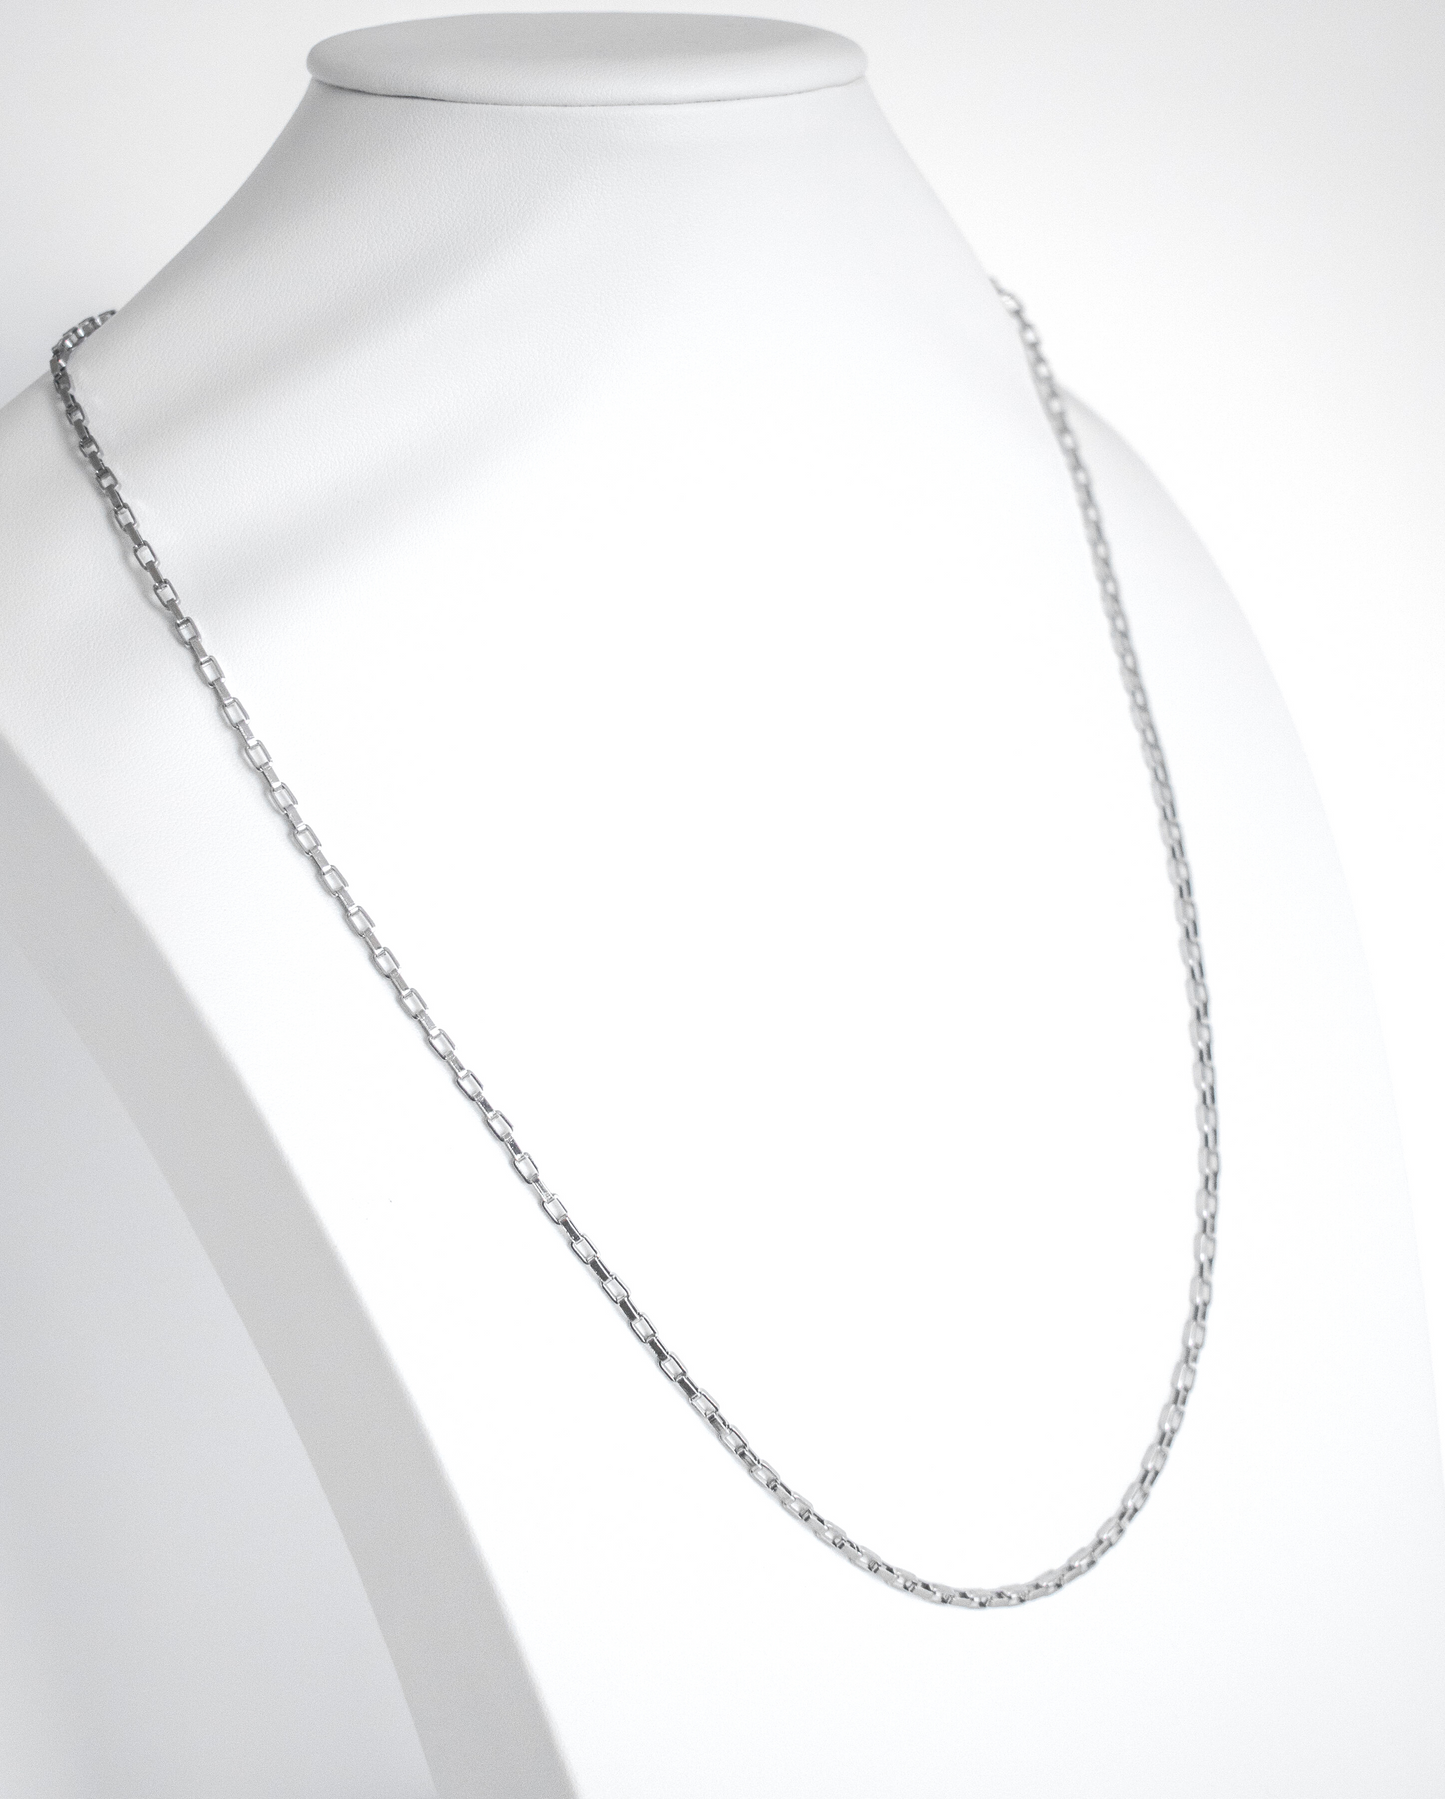 26" stainless steel link necklace